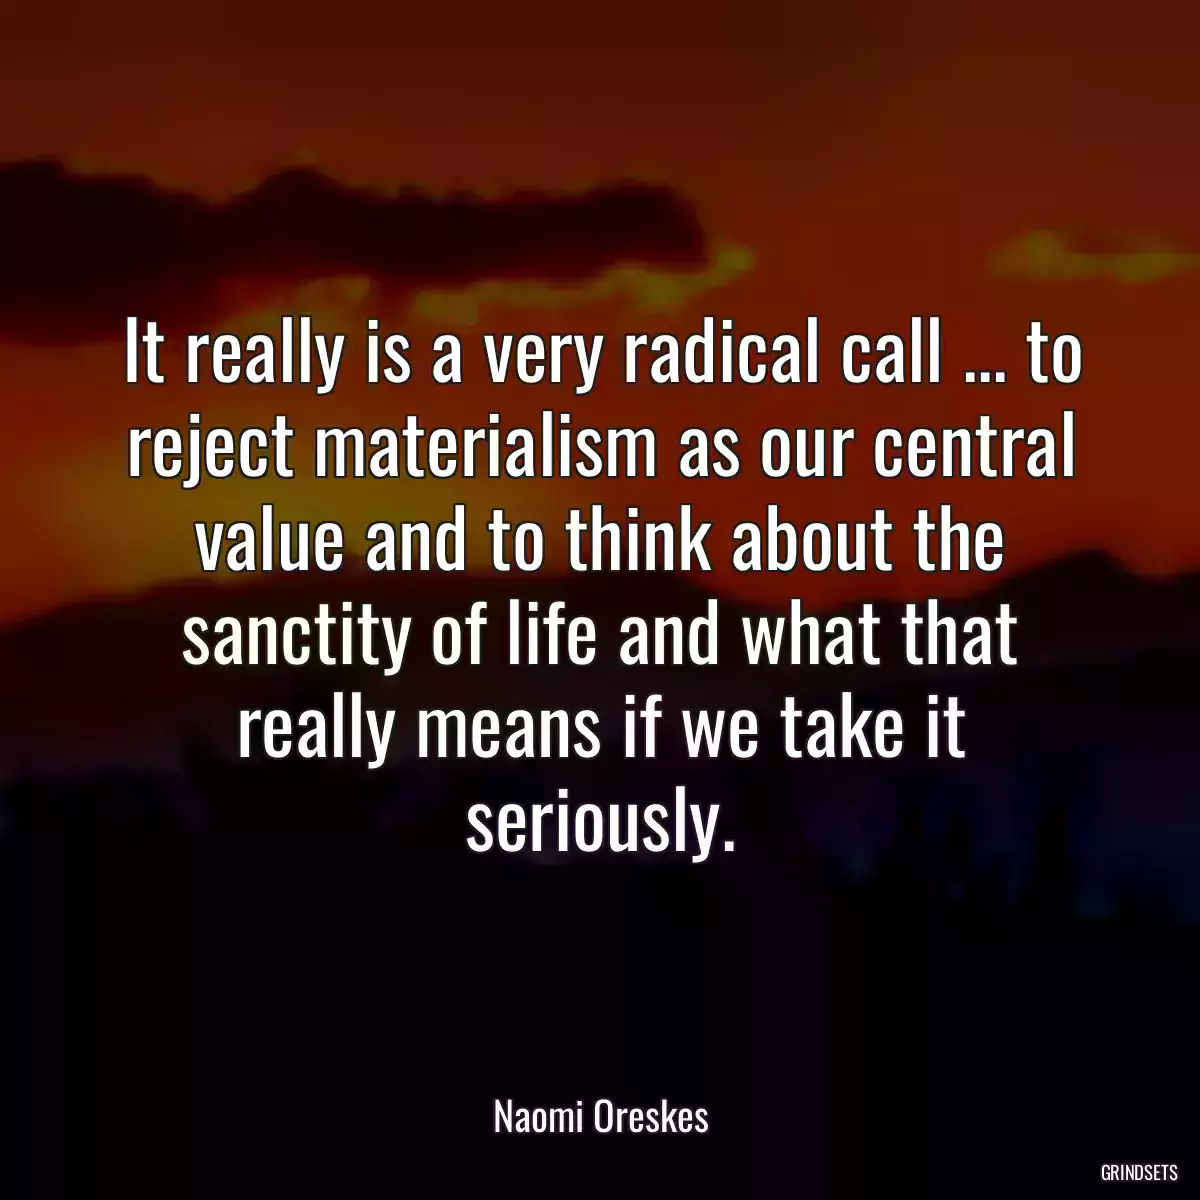 It really is a very radical call ... to reject materialism as our central value and to think about the sanctity of life and what that really means if we take it seriously.